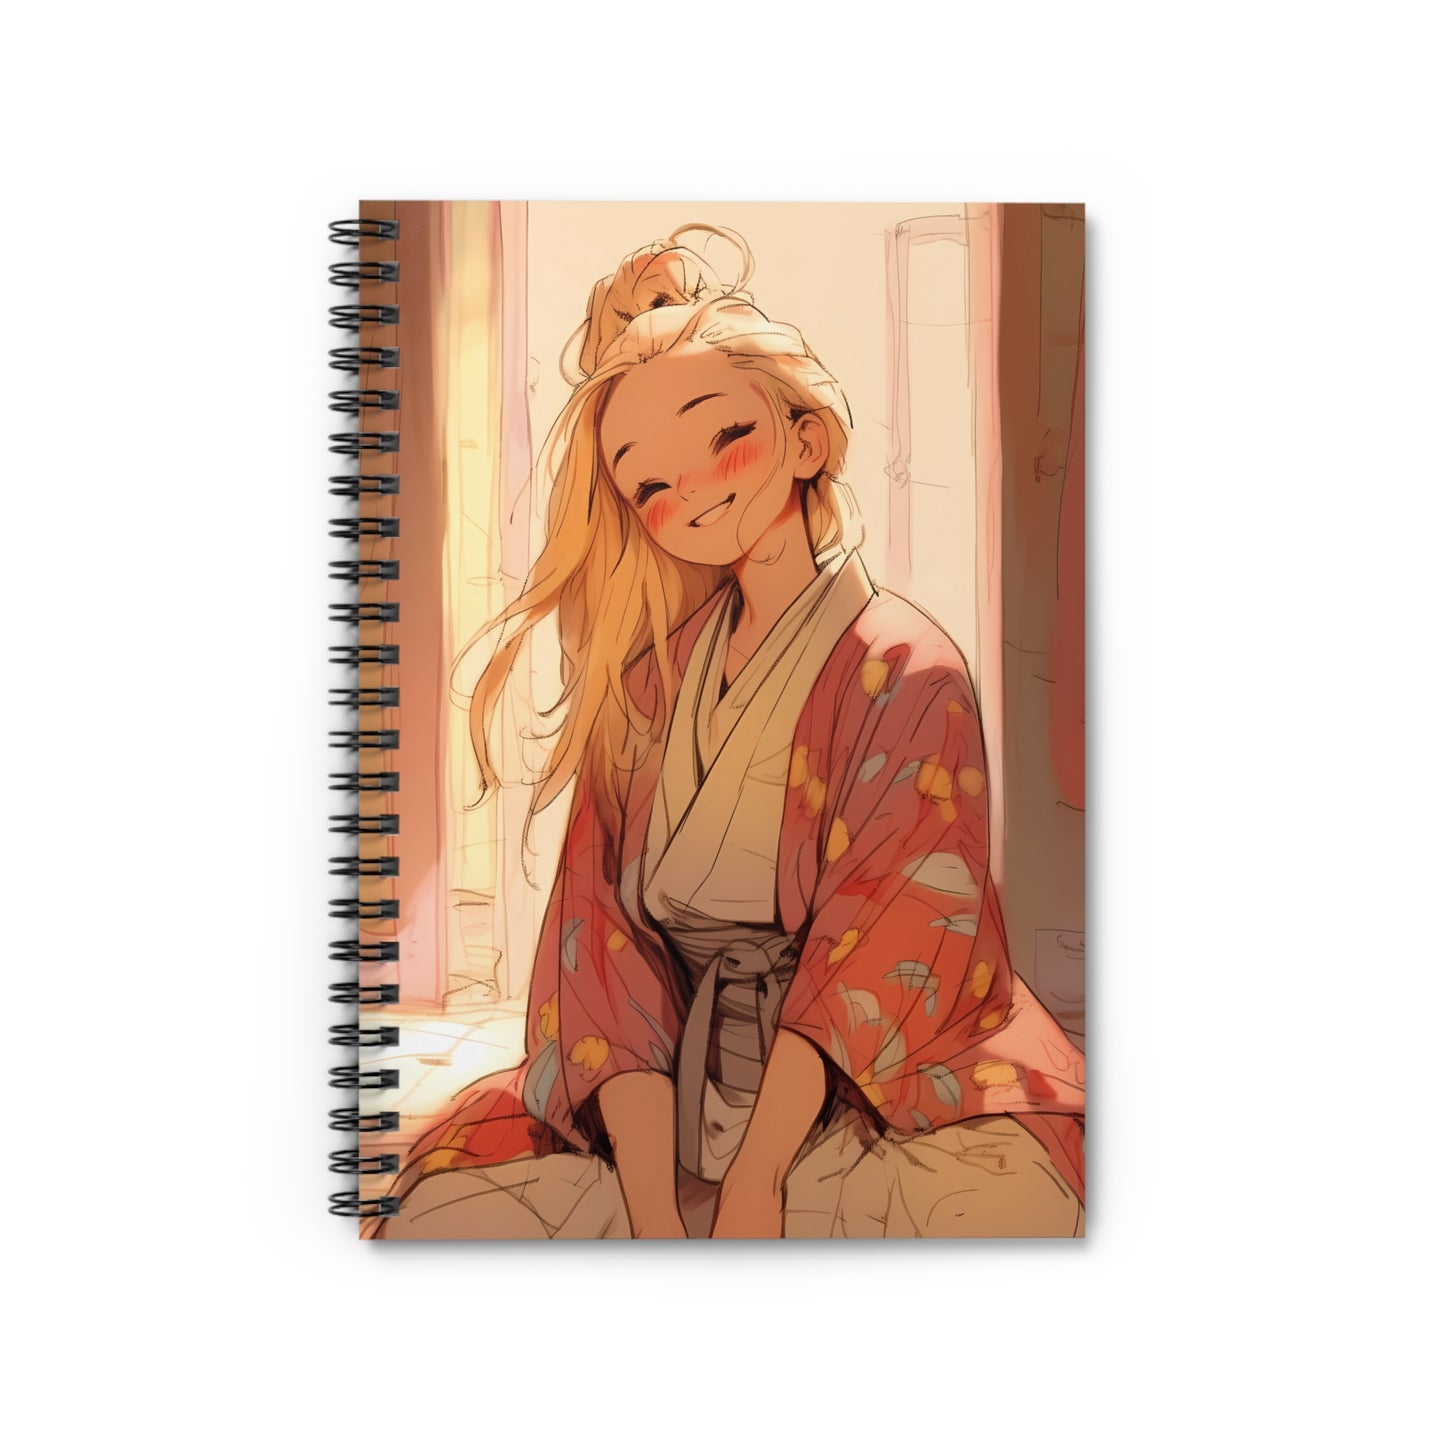 The Student - Cute Anime Girl Notebook